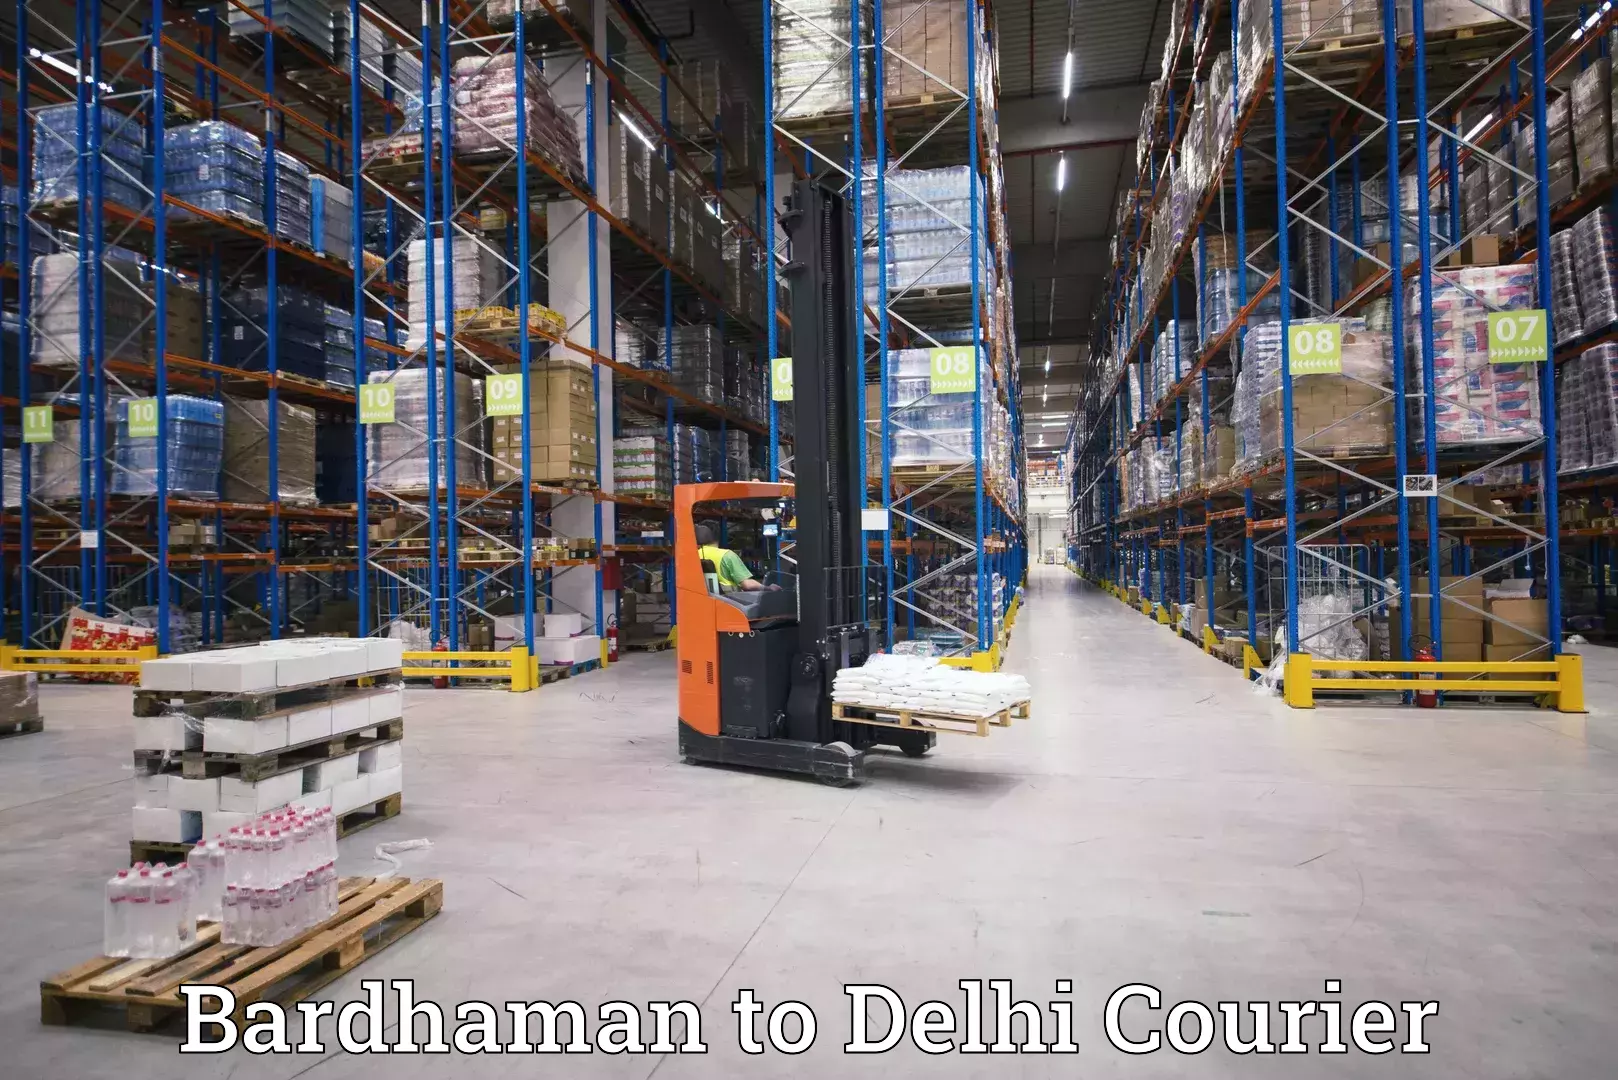 User-friendly courier app Bardhaman to Lodhi Road